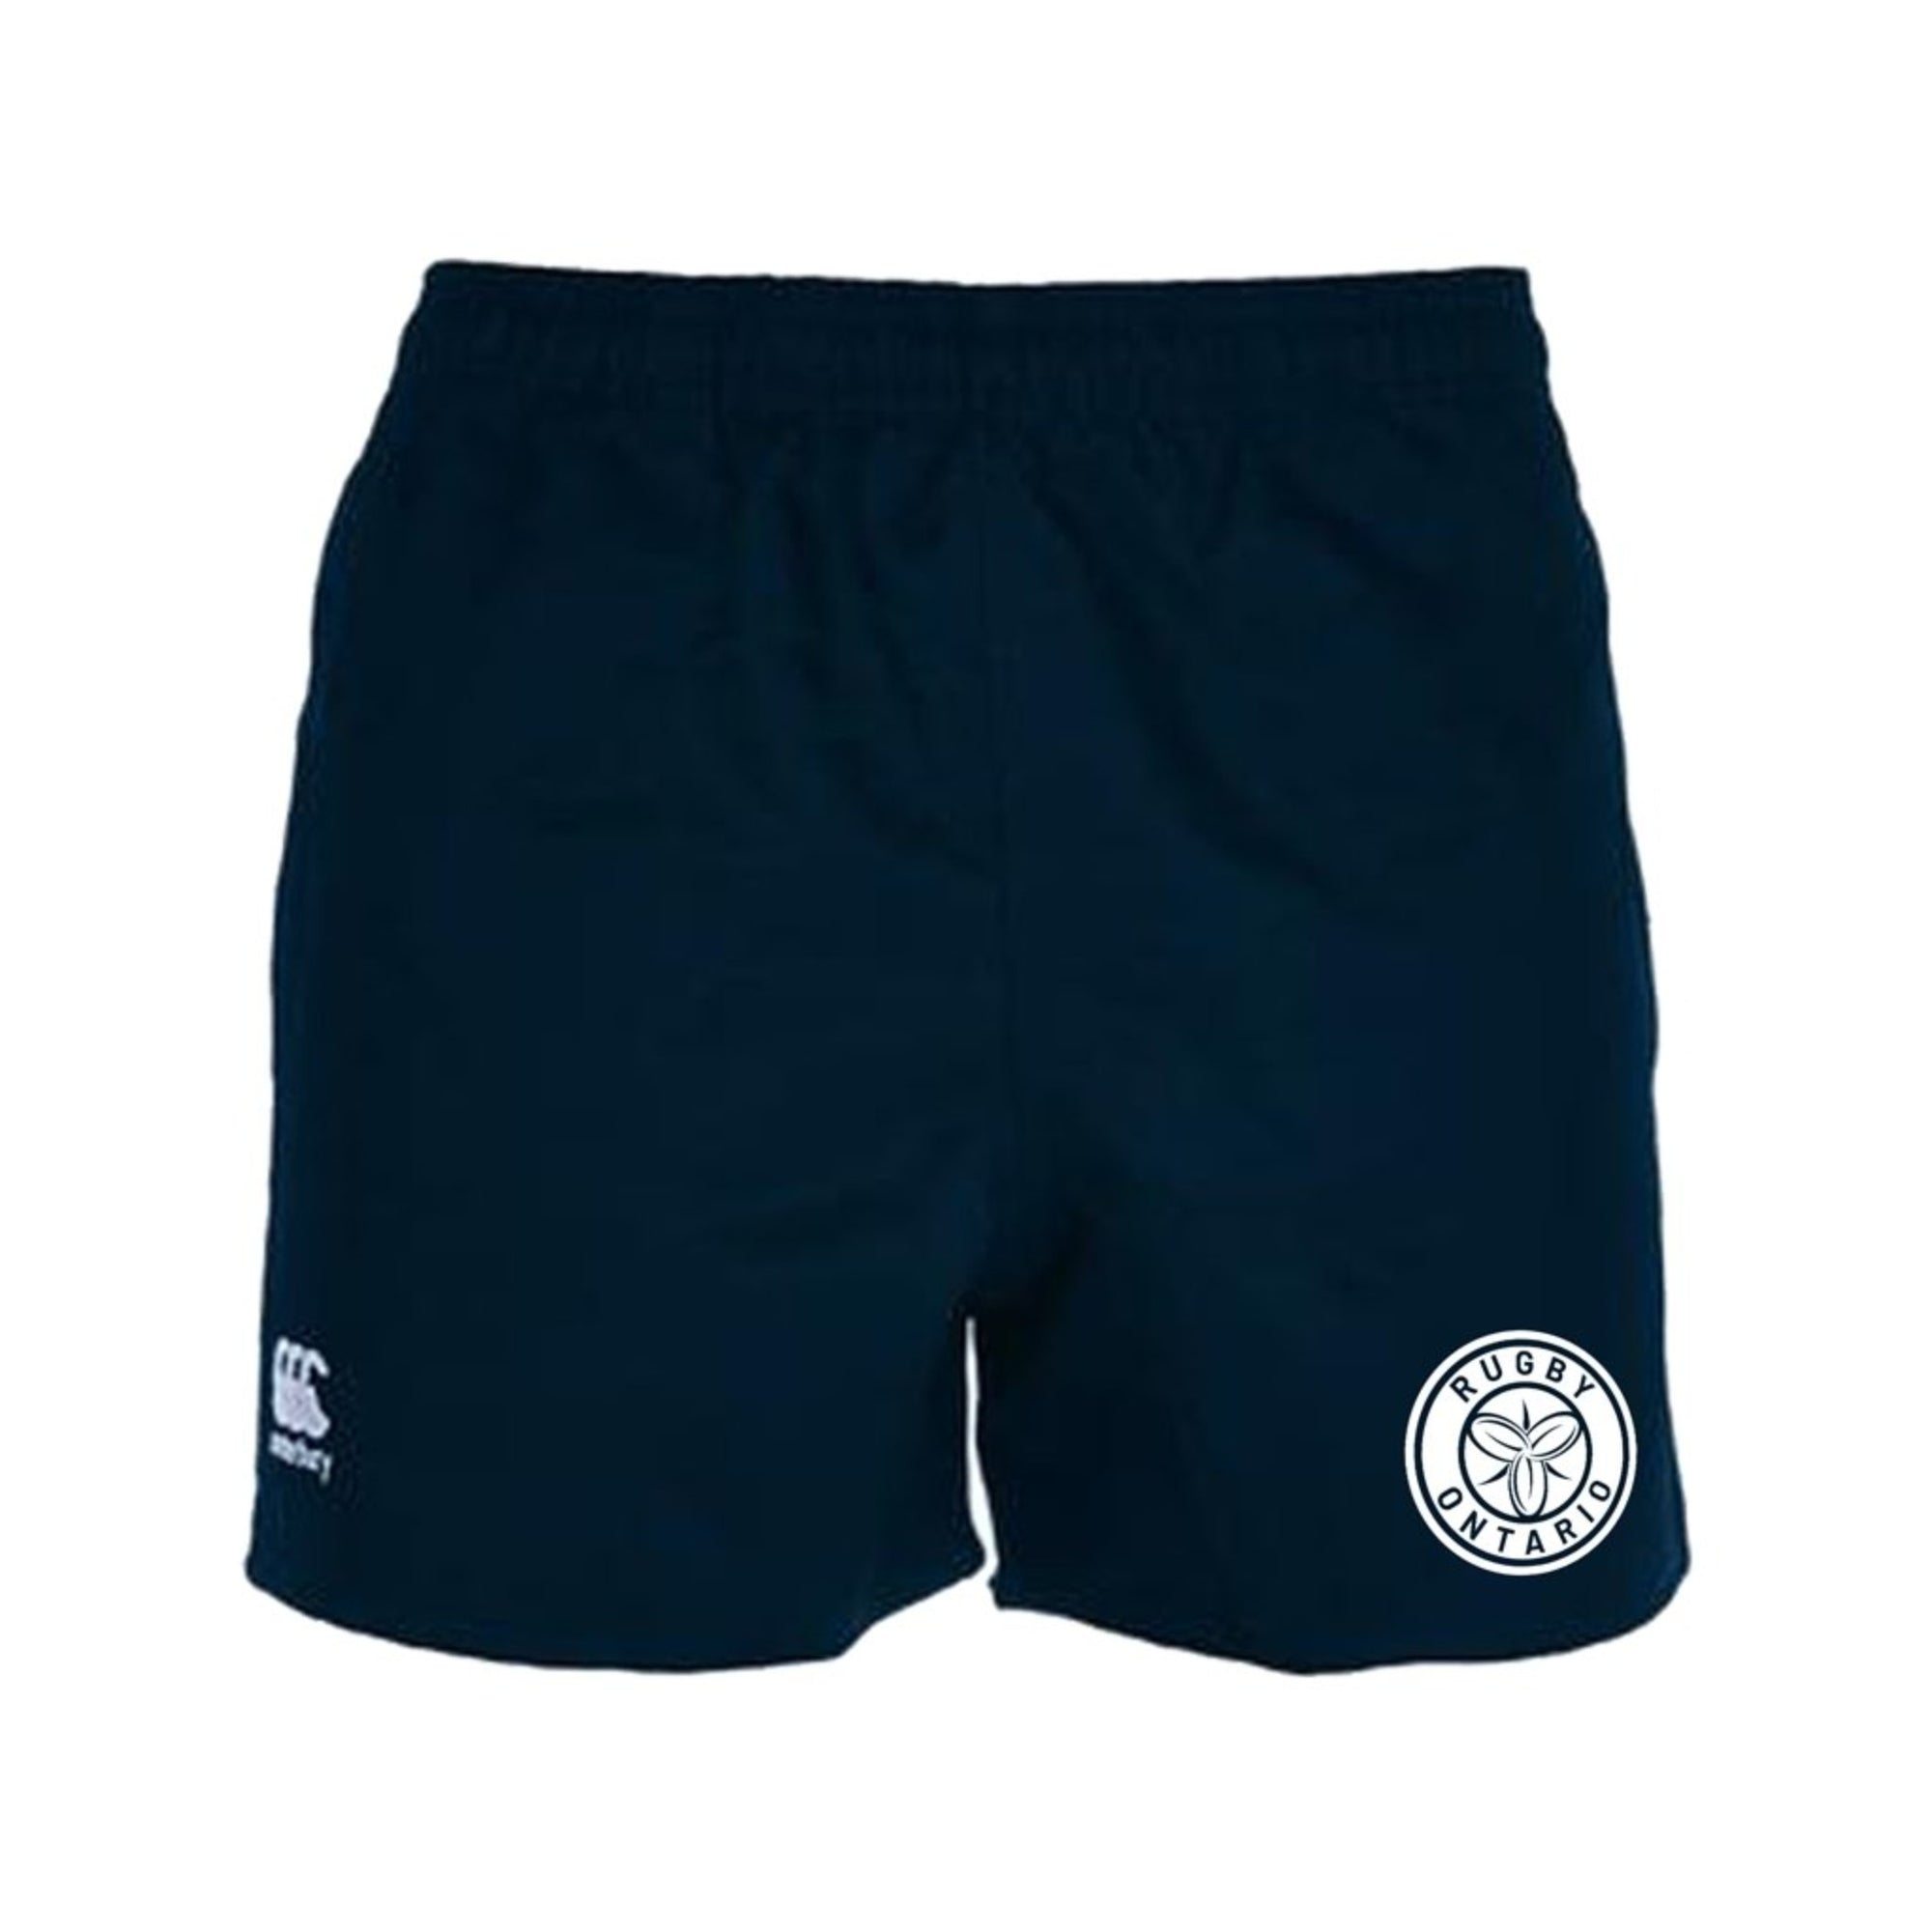 Rugby Ontario CCC AdvanTage Shorts - www.therugbyshop.com www.therugbyshop.com MEN'S / NAVY / XS TRS Distribution Canada SHORTS Rugby Ontario CCC AdvanTage Shorts